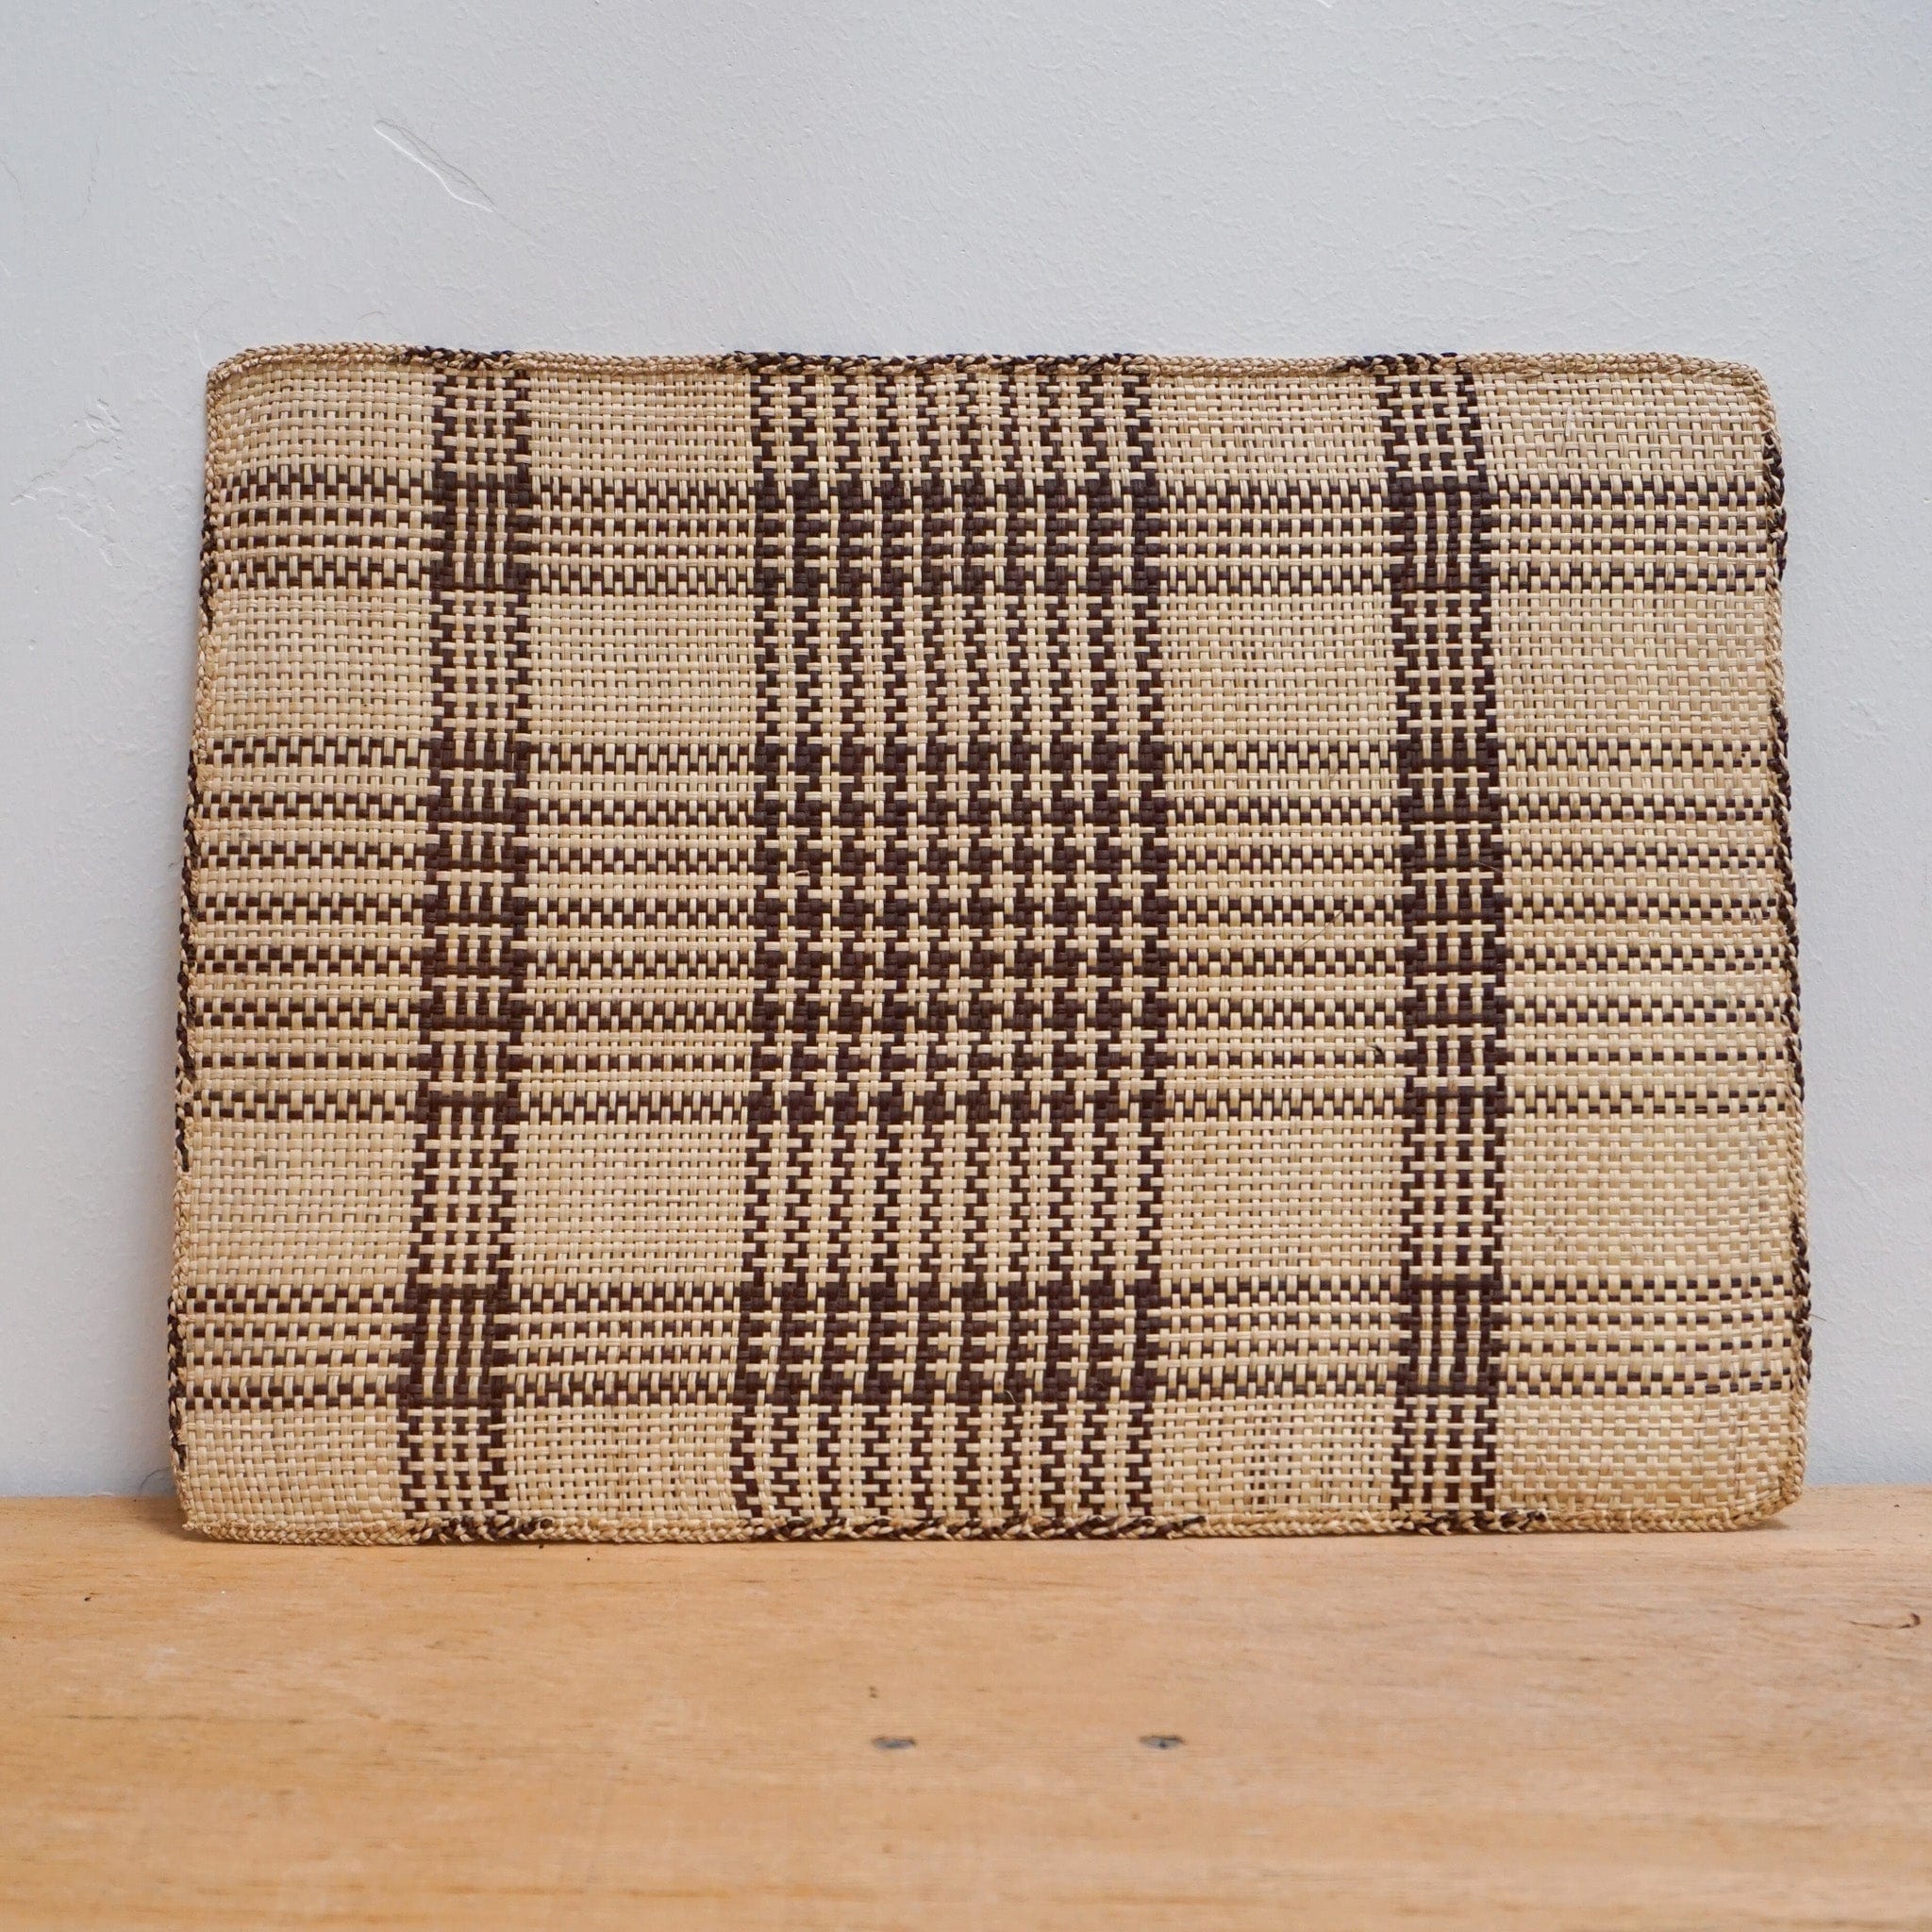 Guanabana Placemats Beige/Brown Striped Straw Placemat by Guanabana